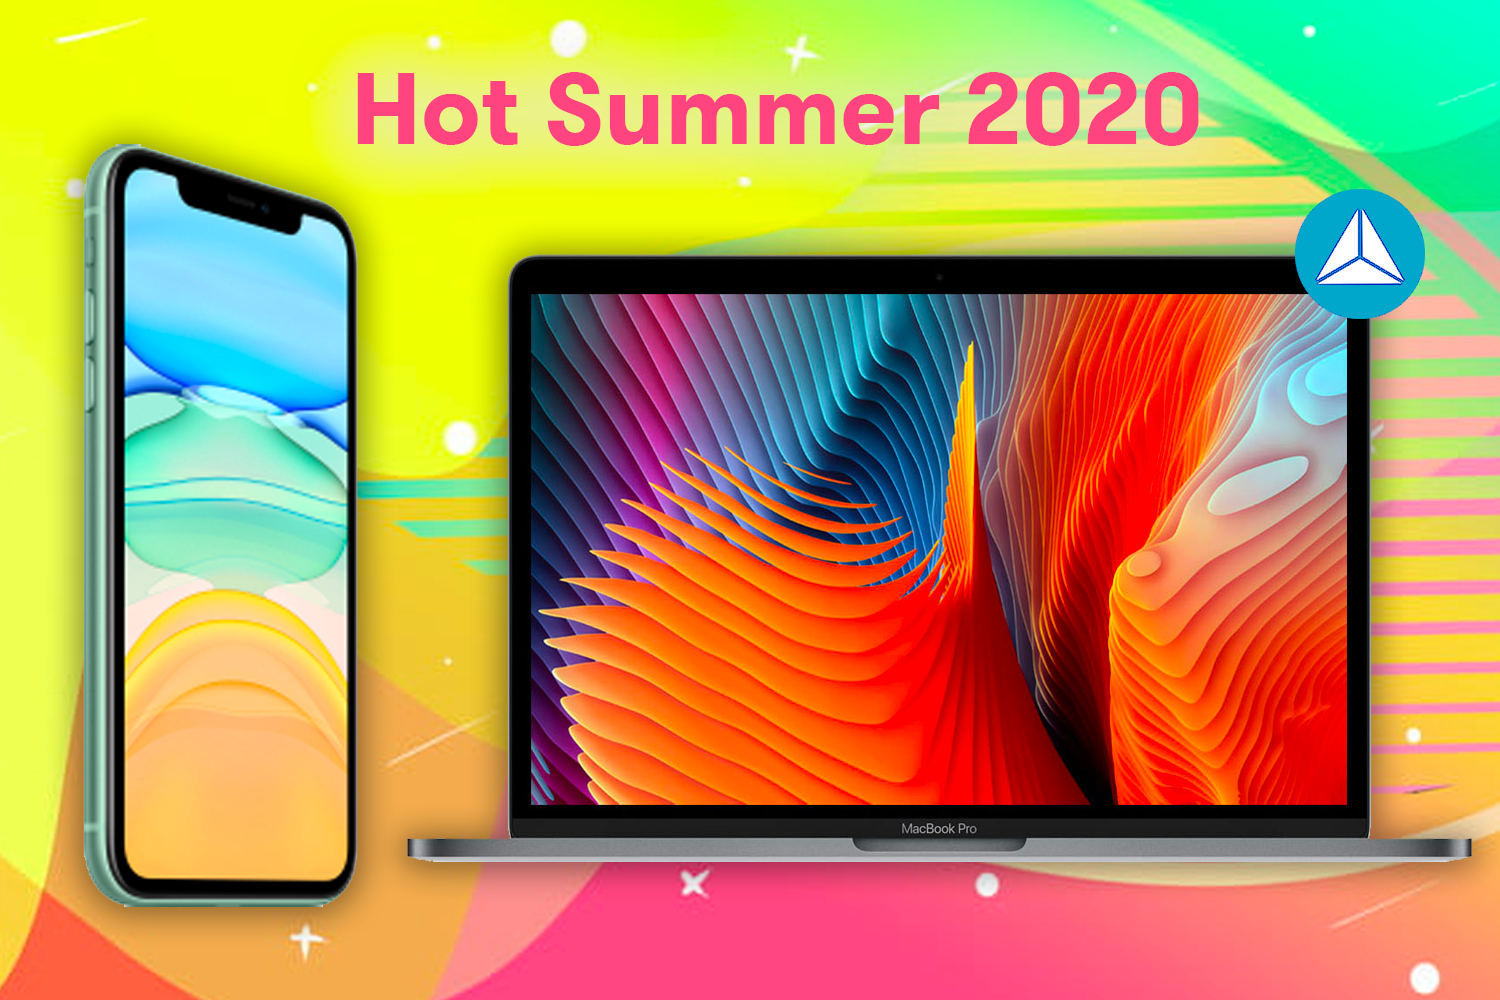 Participate in  AIVIA Mega Promotion and earn iPhone 11 Pro or MacBook Pro 16